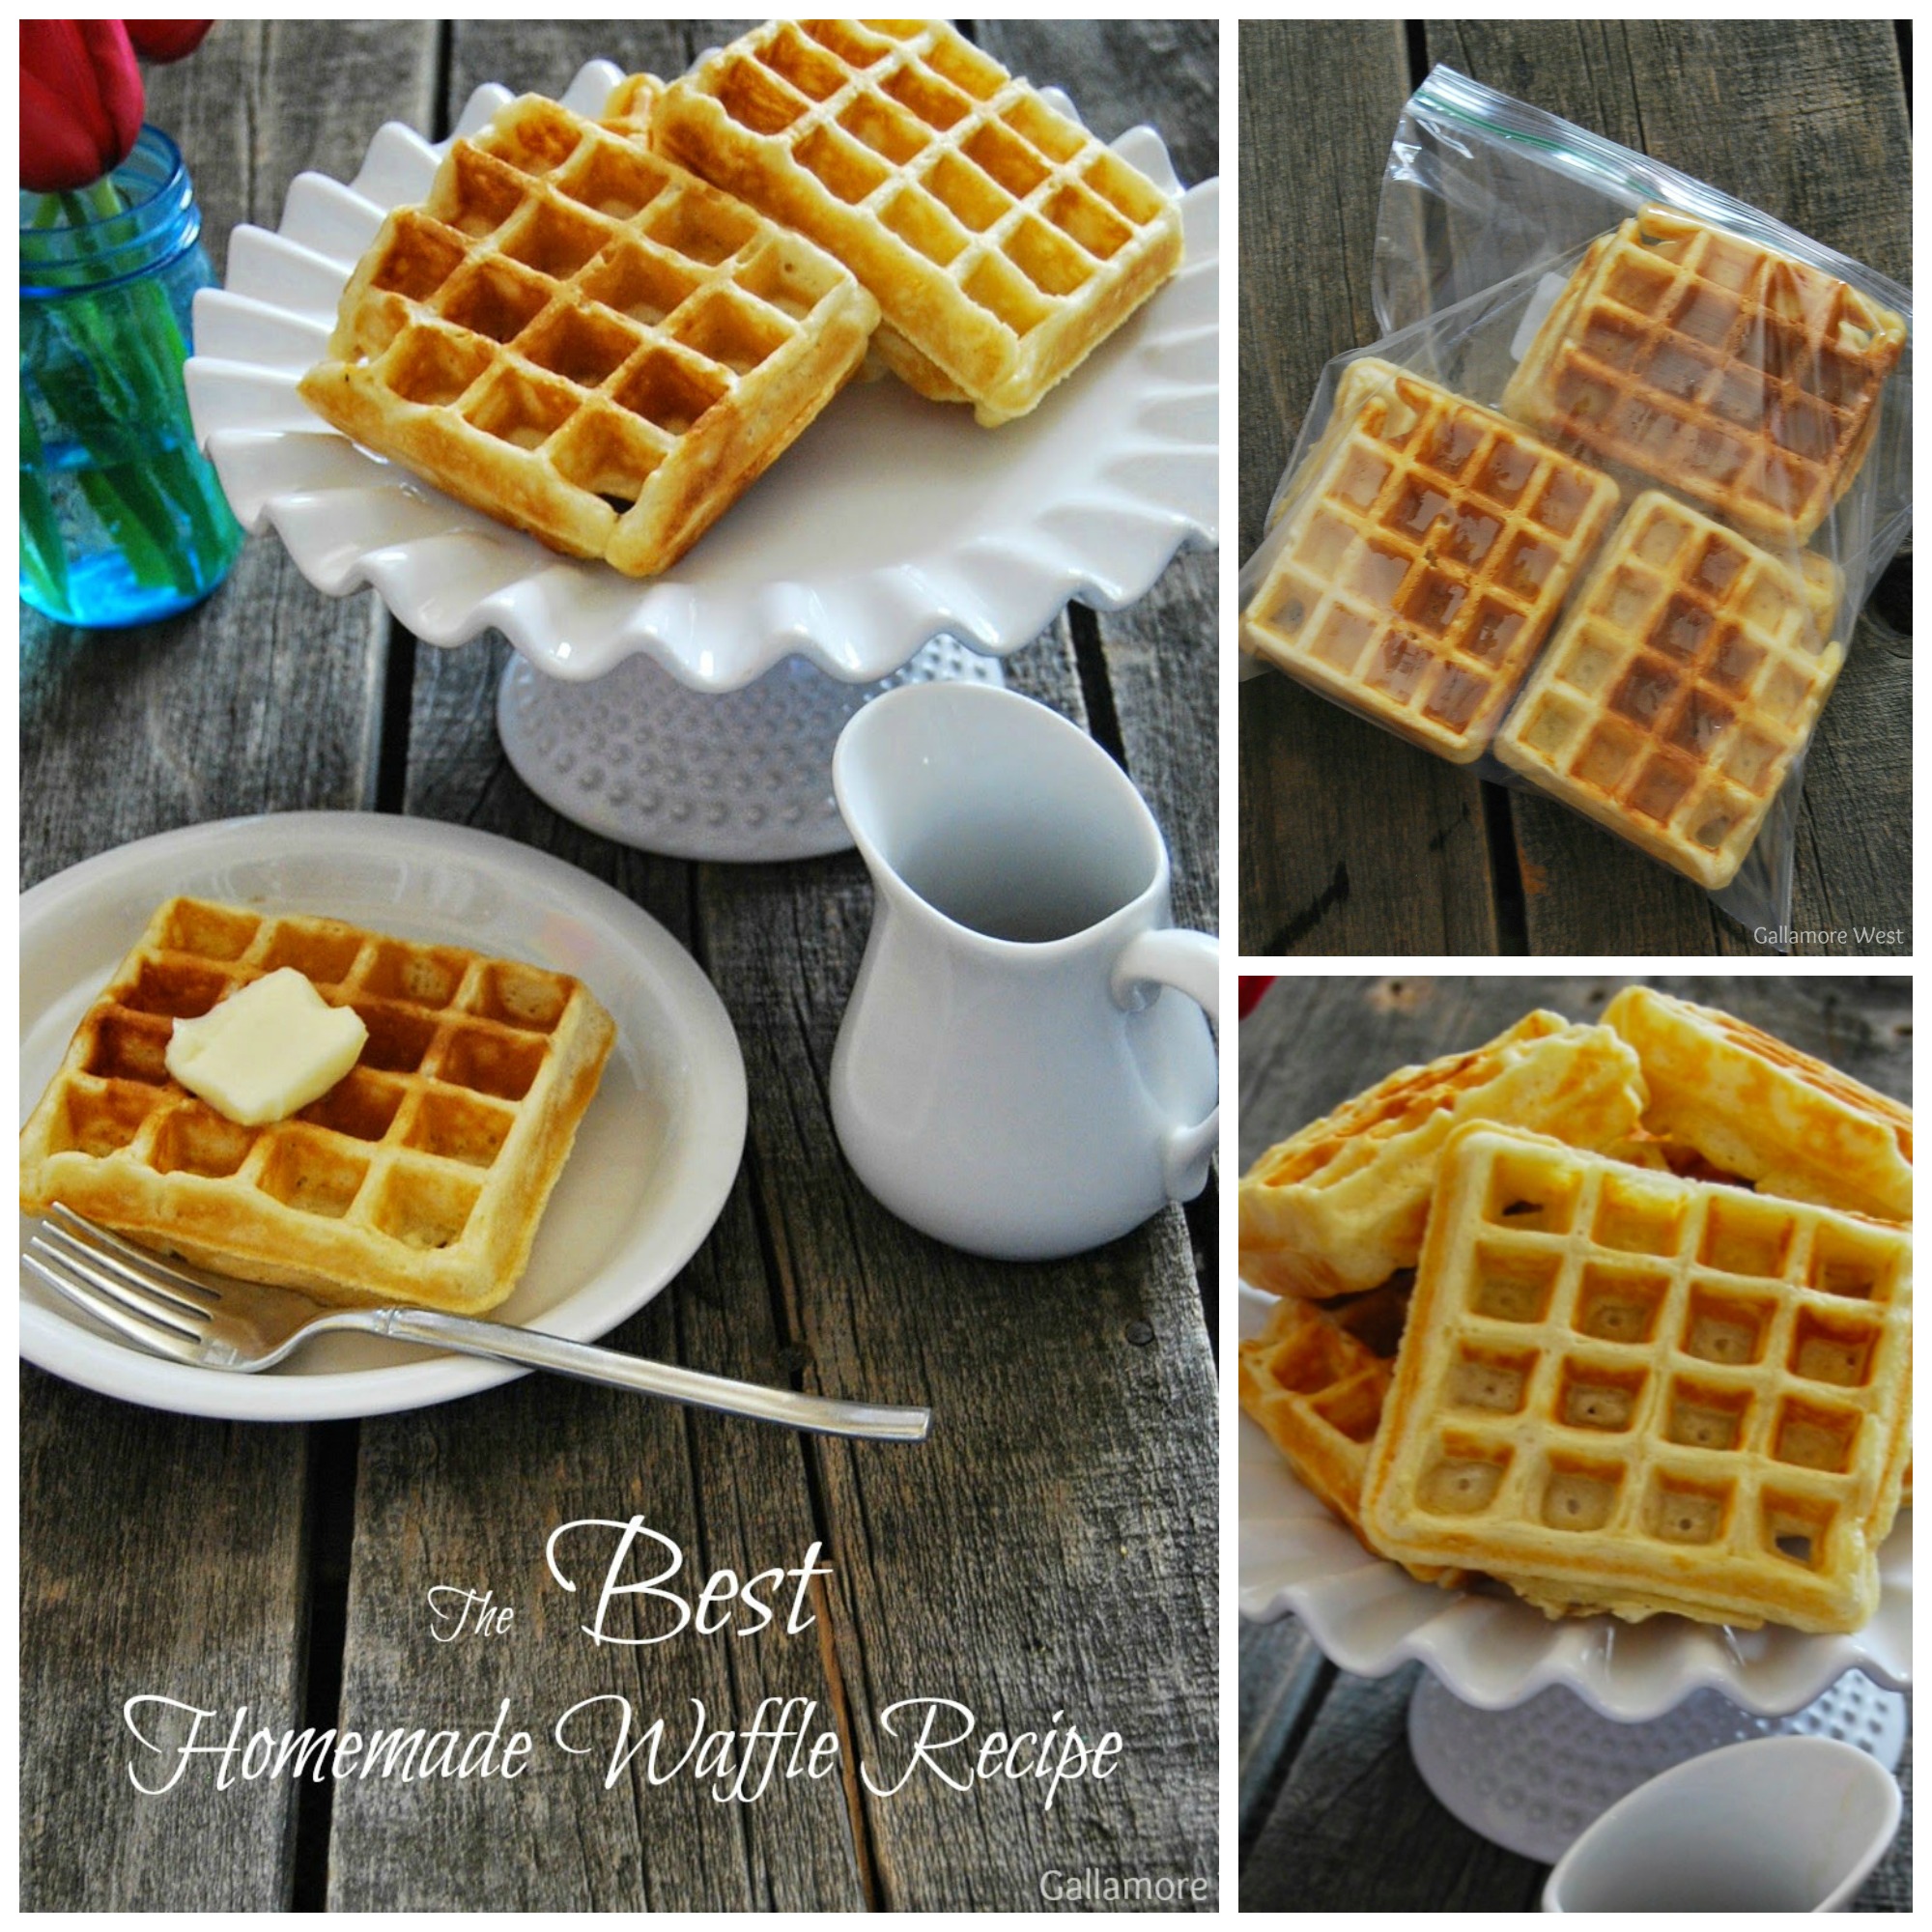 The best homemade waffle recipe